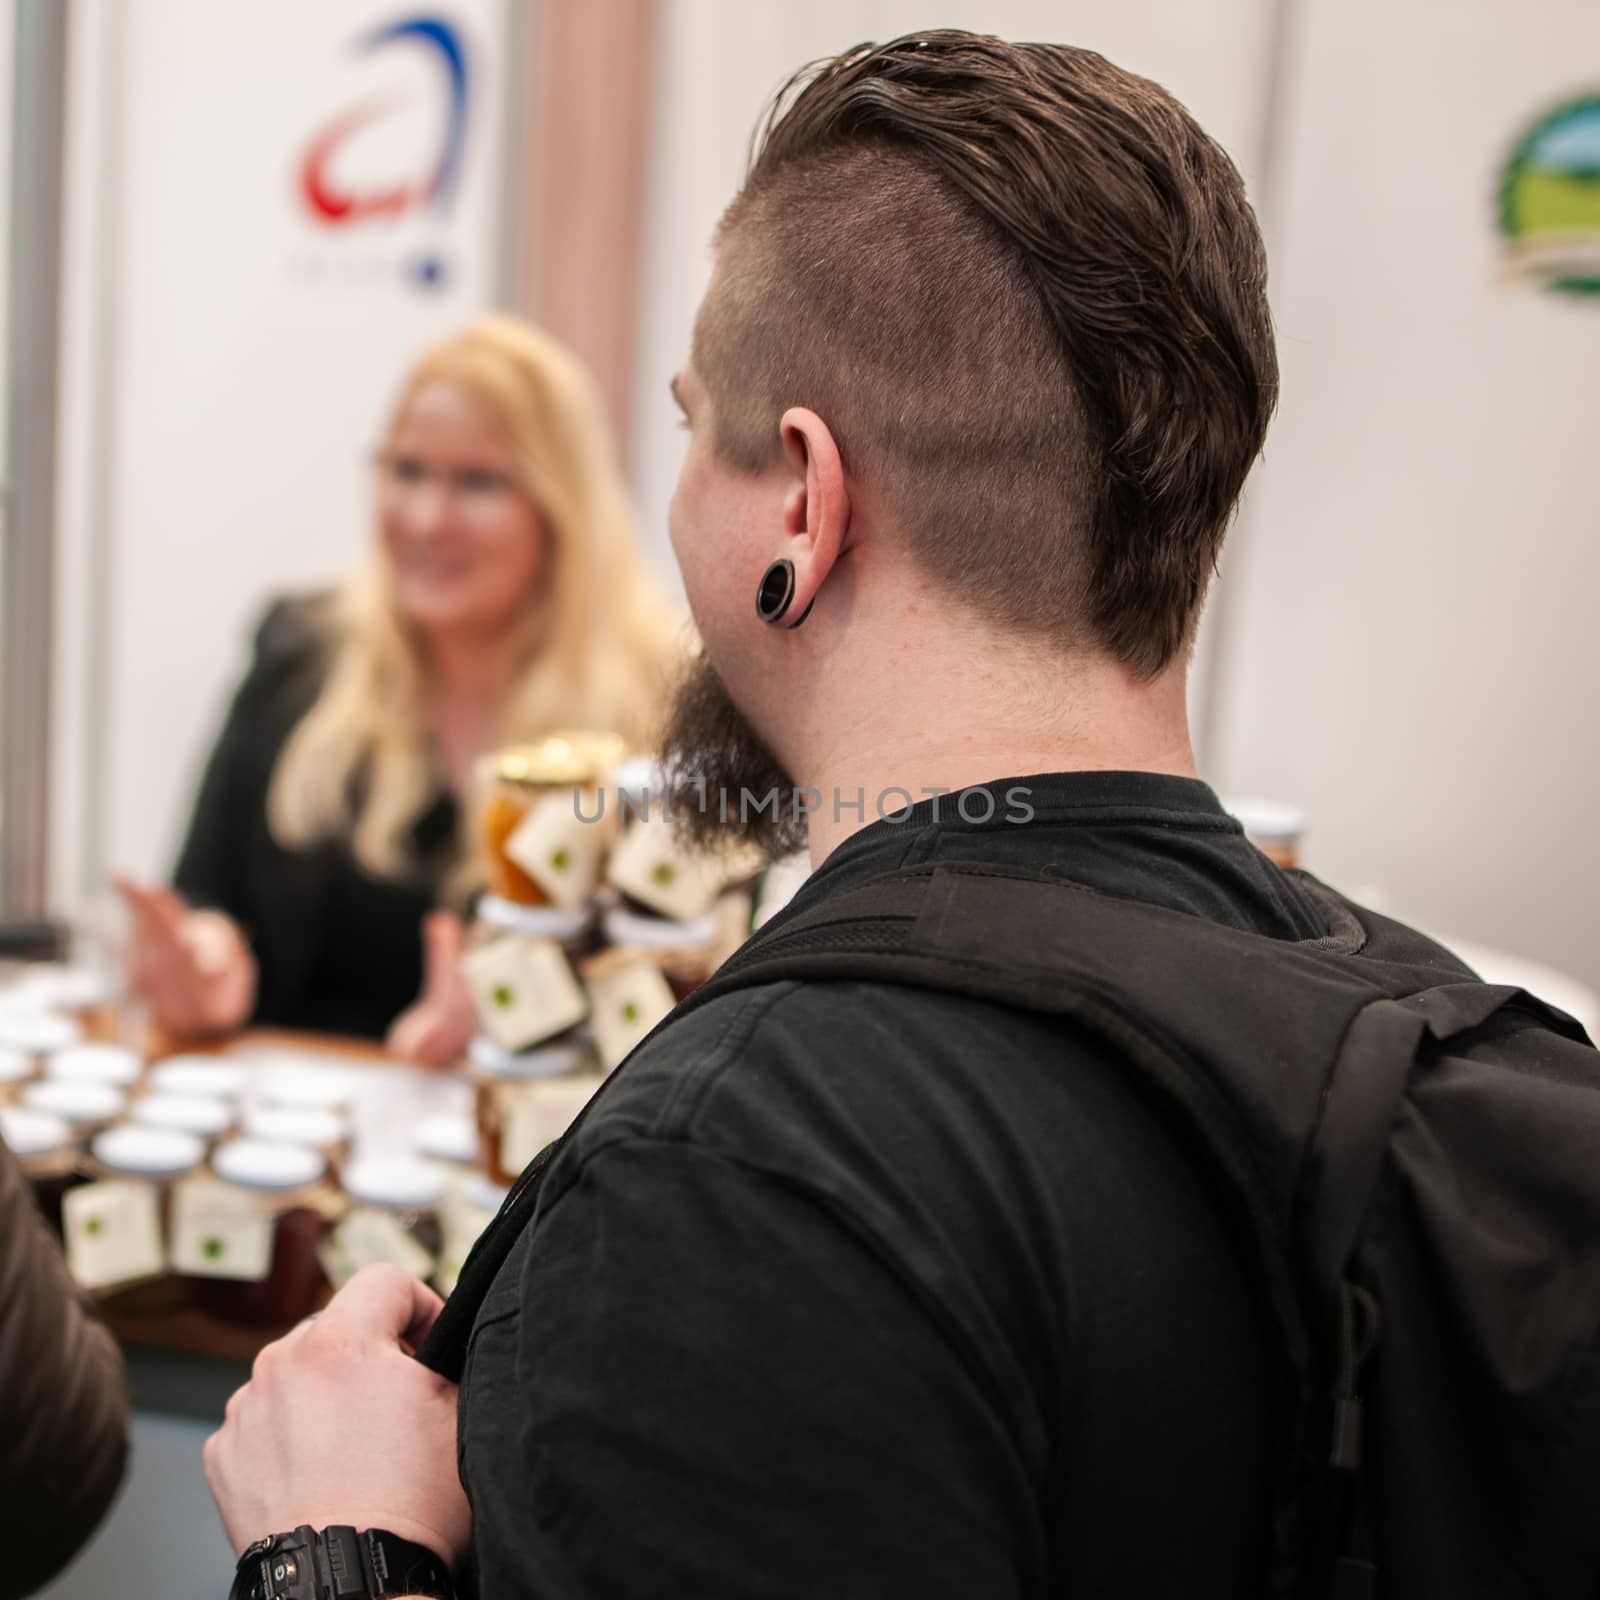 Young men having, carrying a trendy hair cut and an ear hoop, is conversation while attending an event at the convention trade center in Brno. BVV Brno Exhibition center. Czech Republic